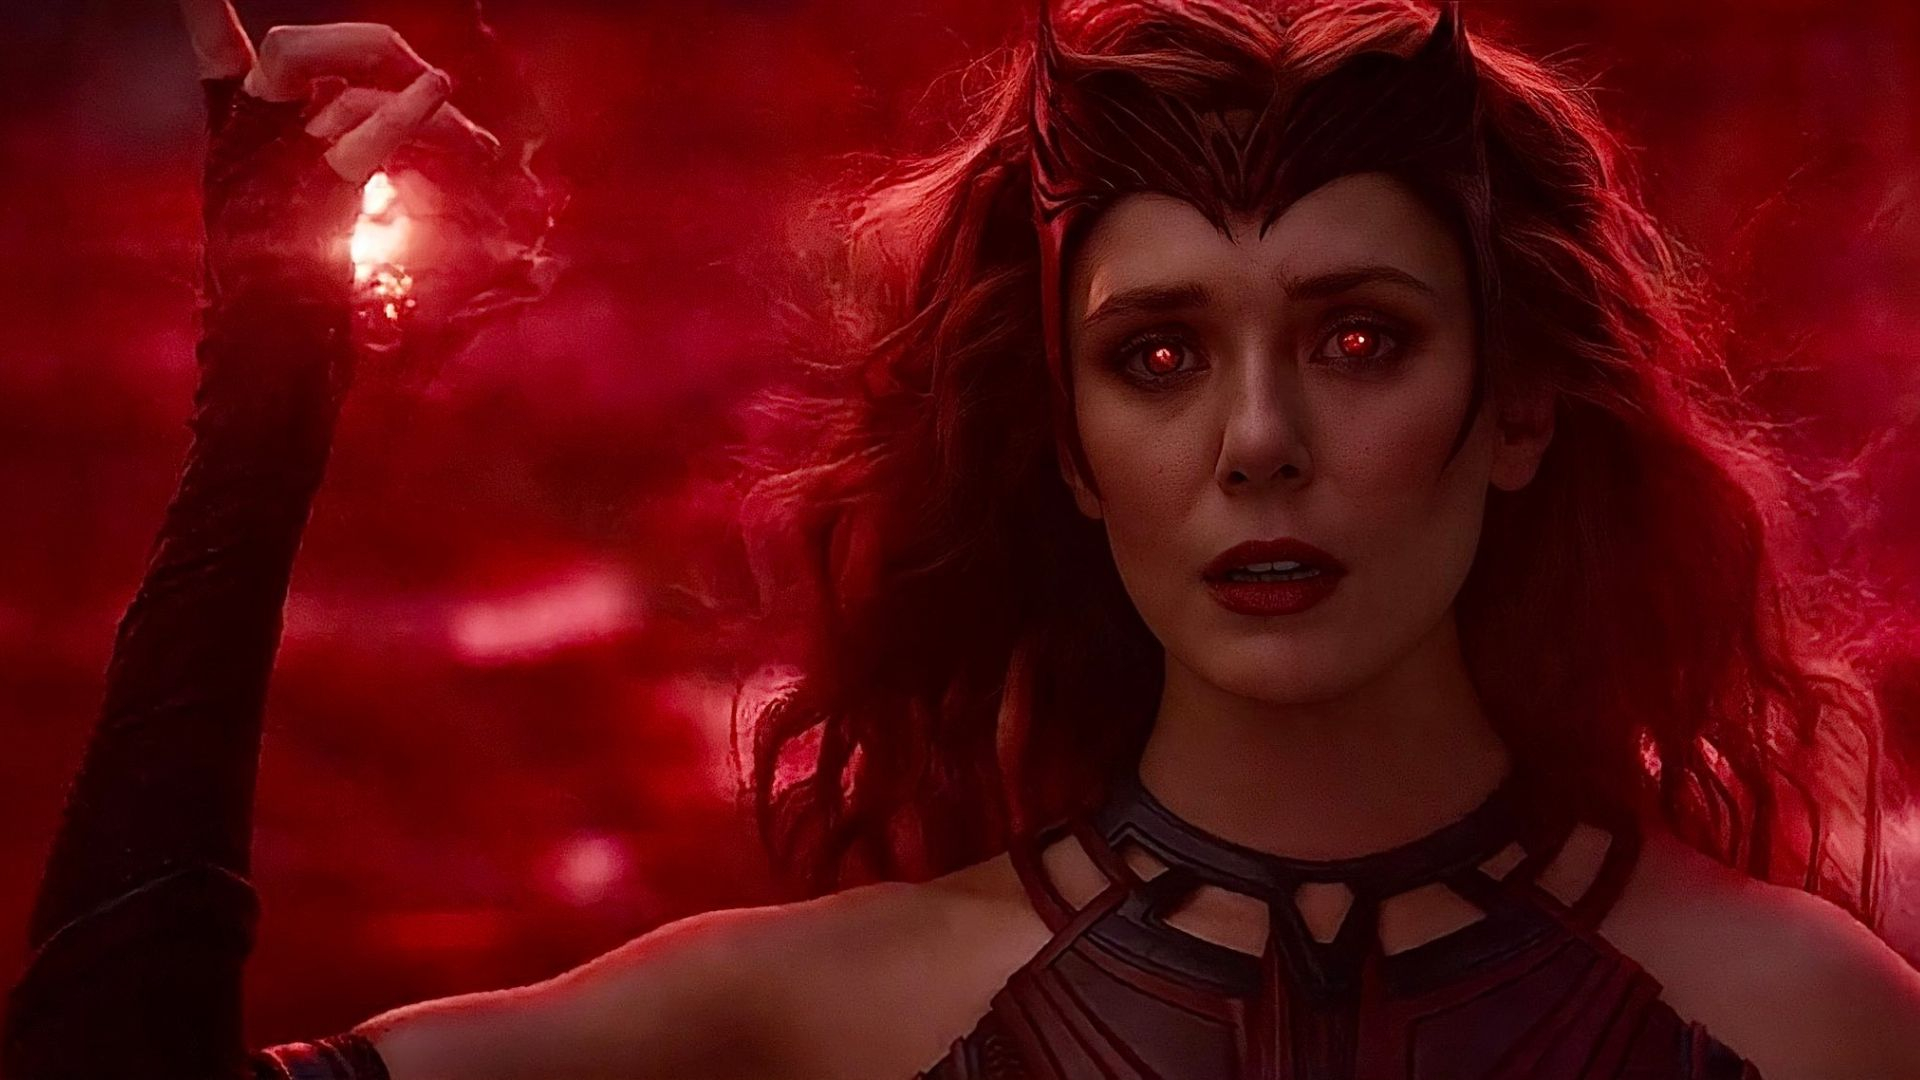 1920x1080 Scarlet Witch Wallpapers: Top Free Scarlet Witch Backgrounds, Pictures \u0026 Images Download